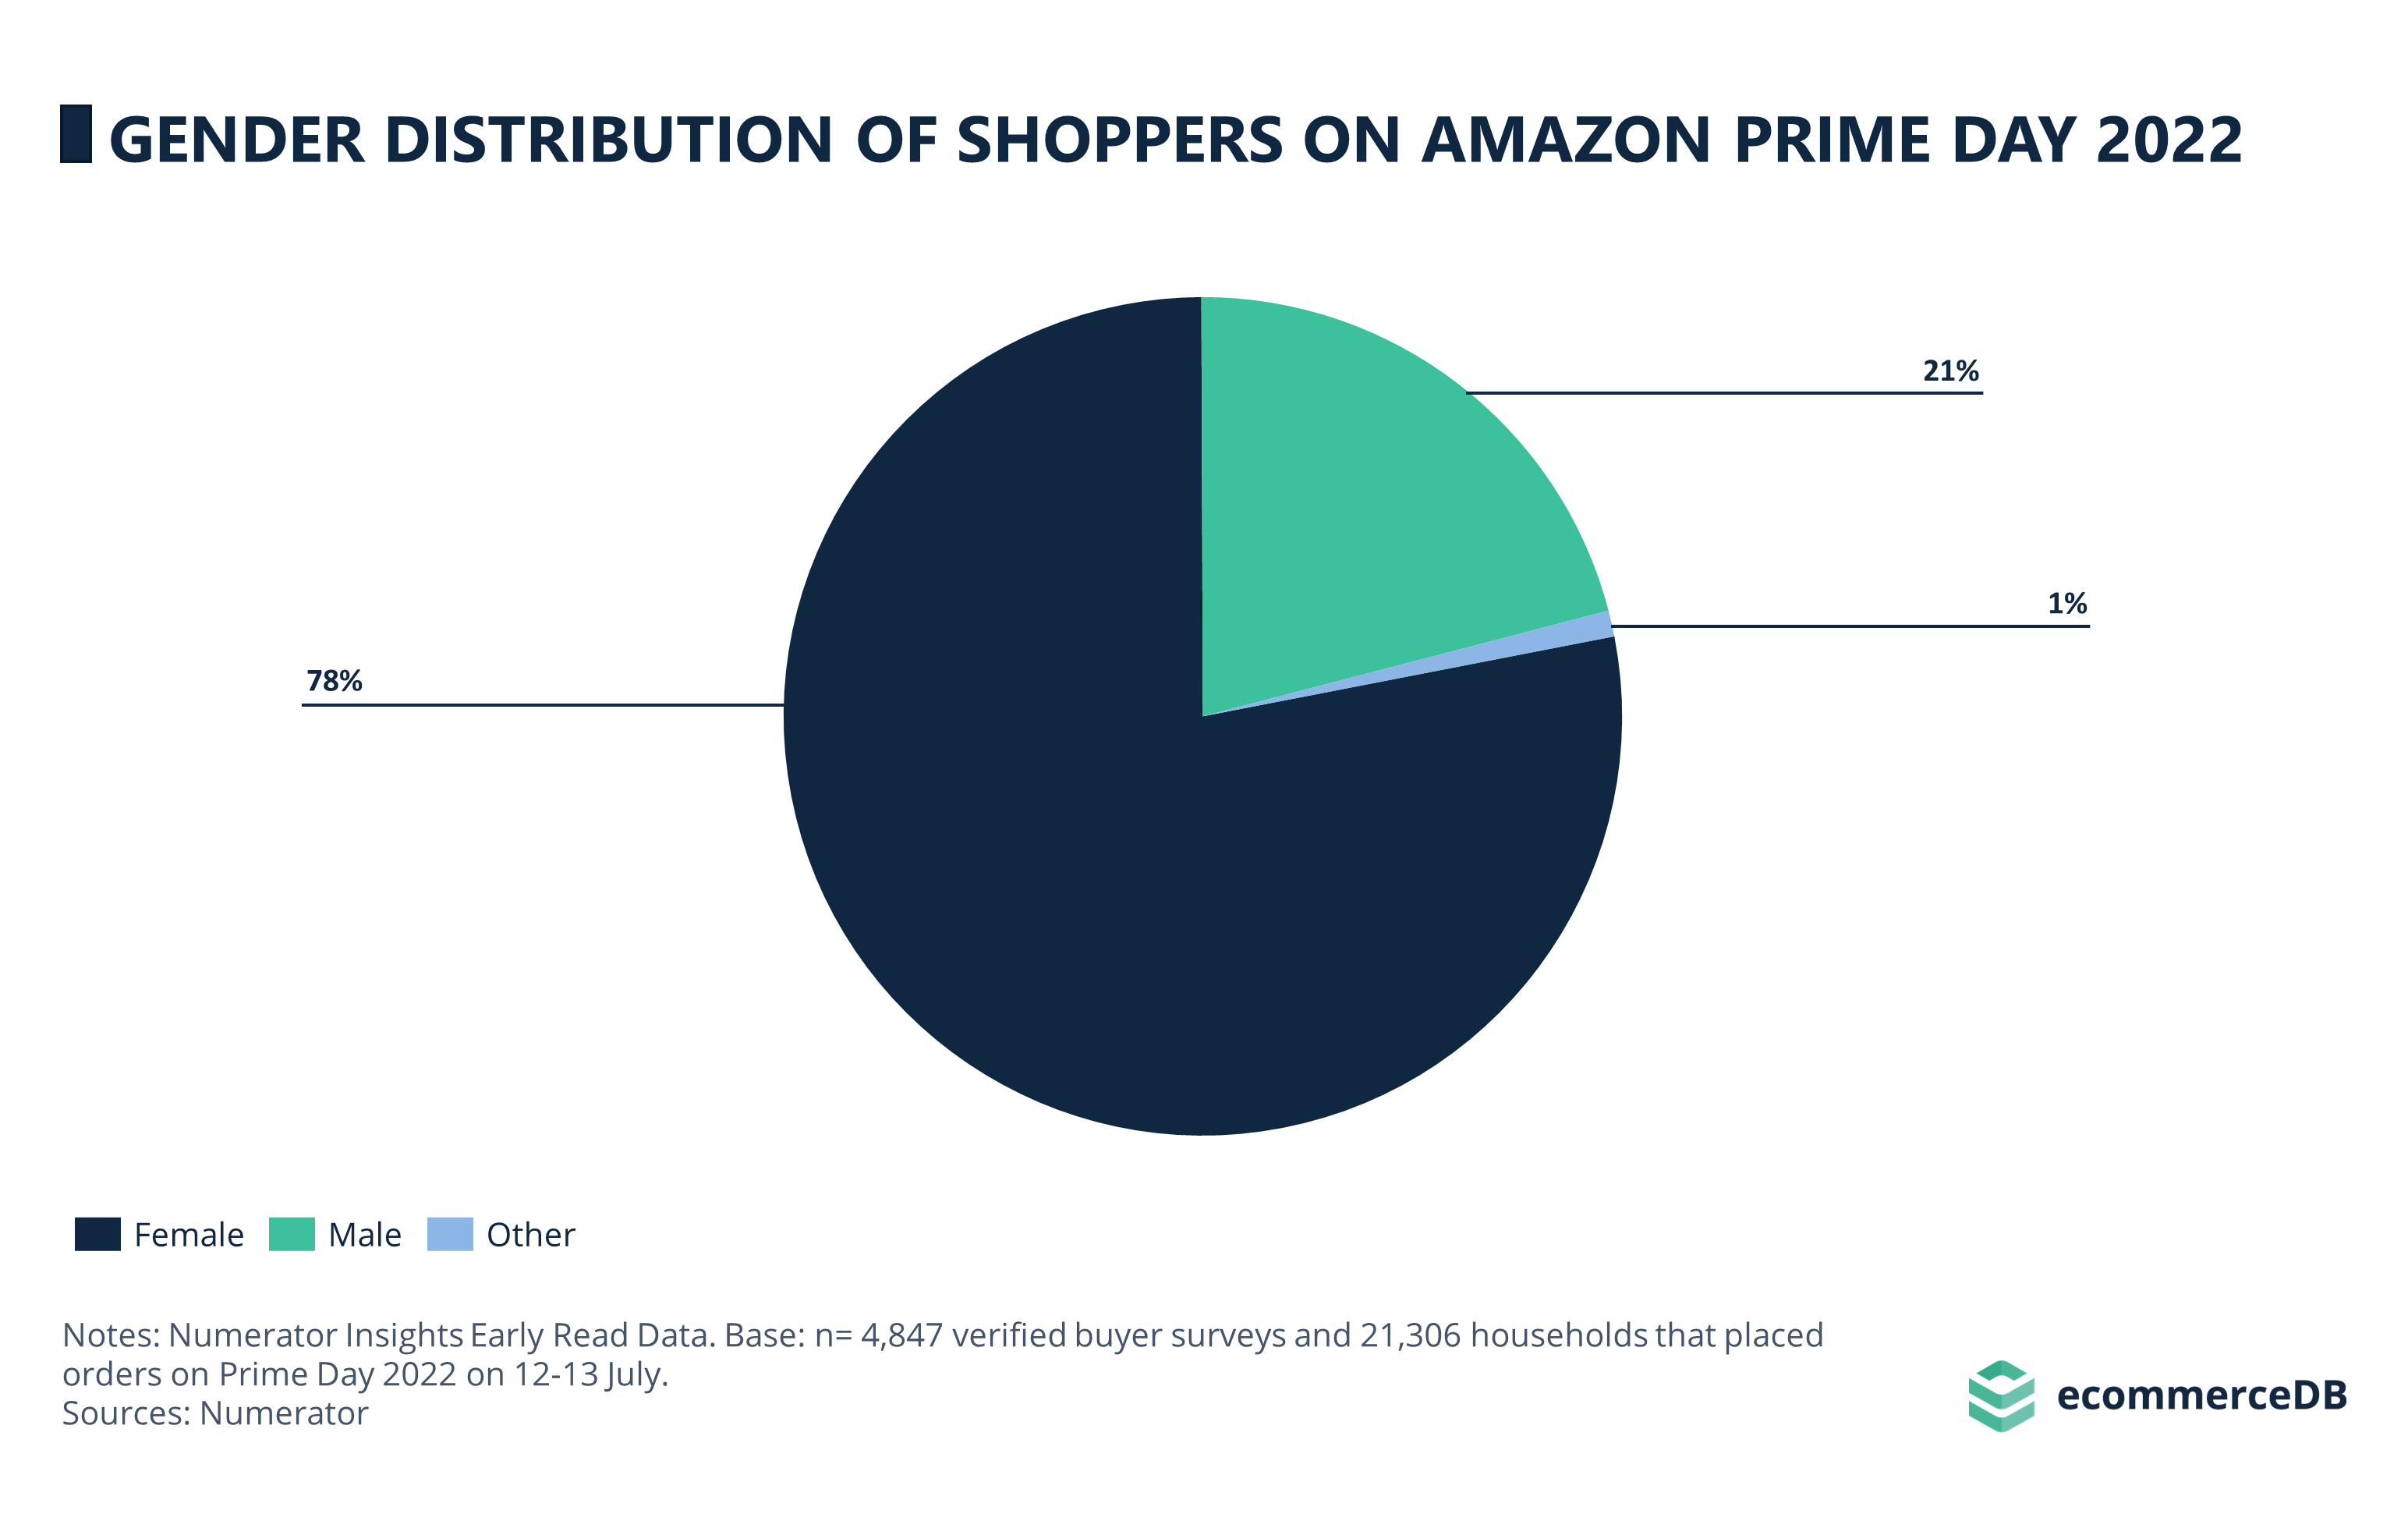 Prime Day Sales in 2022 Did Inflation Impact Amazon?